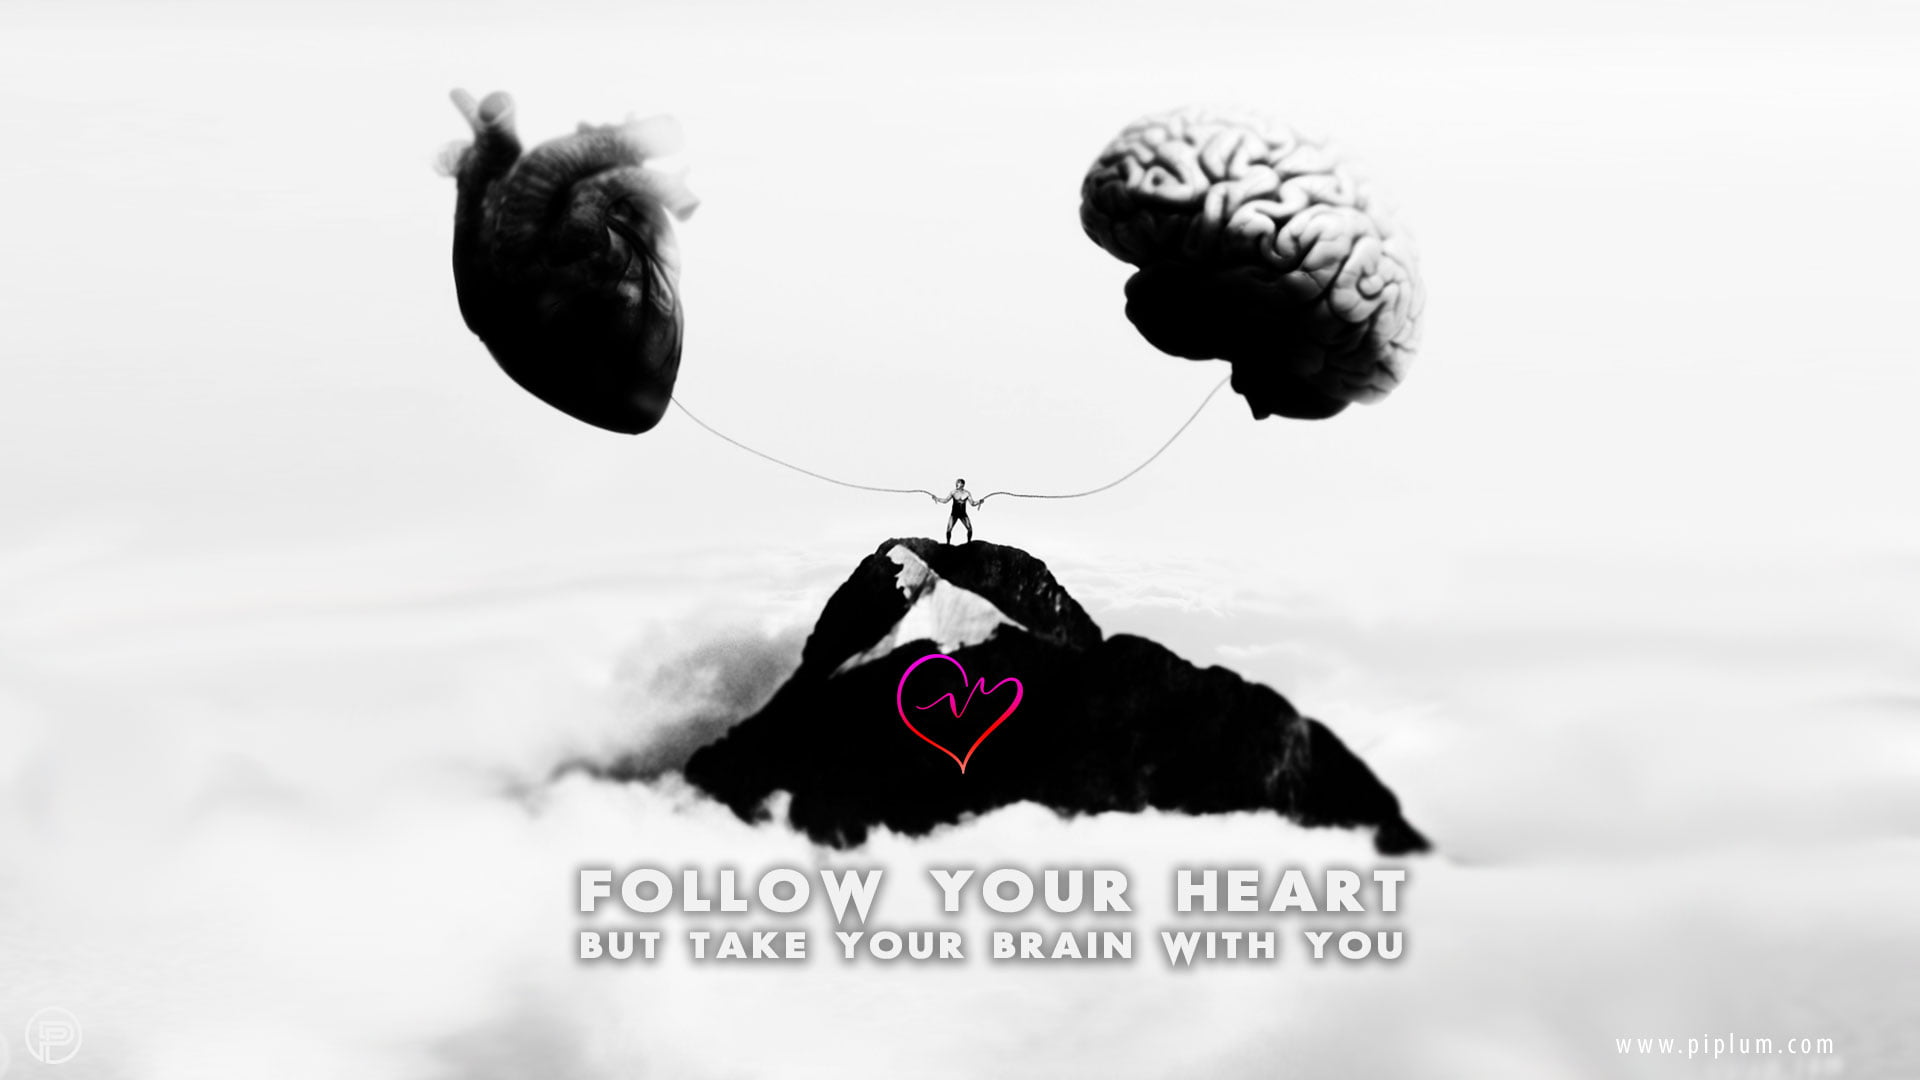 Follow-Your-Heart-Brain-inspirational-quote